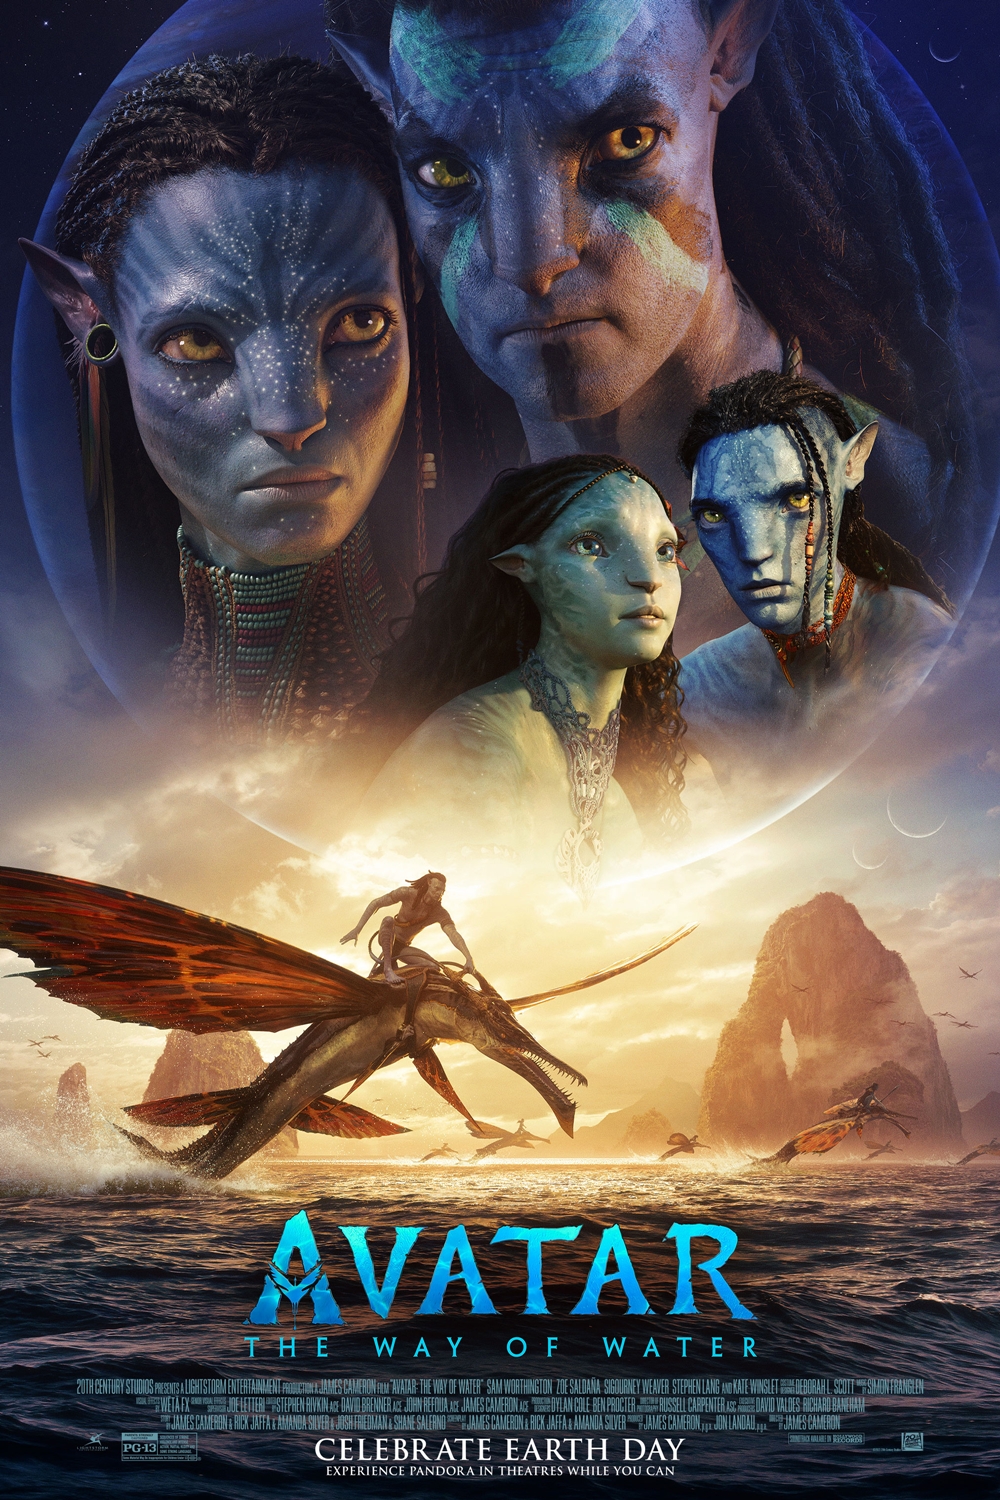 Poster for Avatar: The Way of Water (2D)